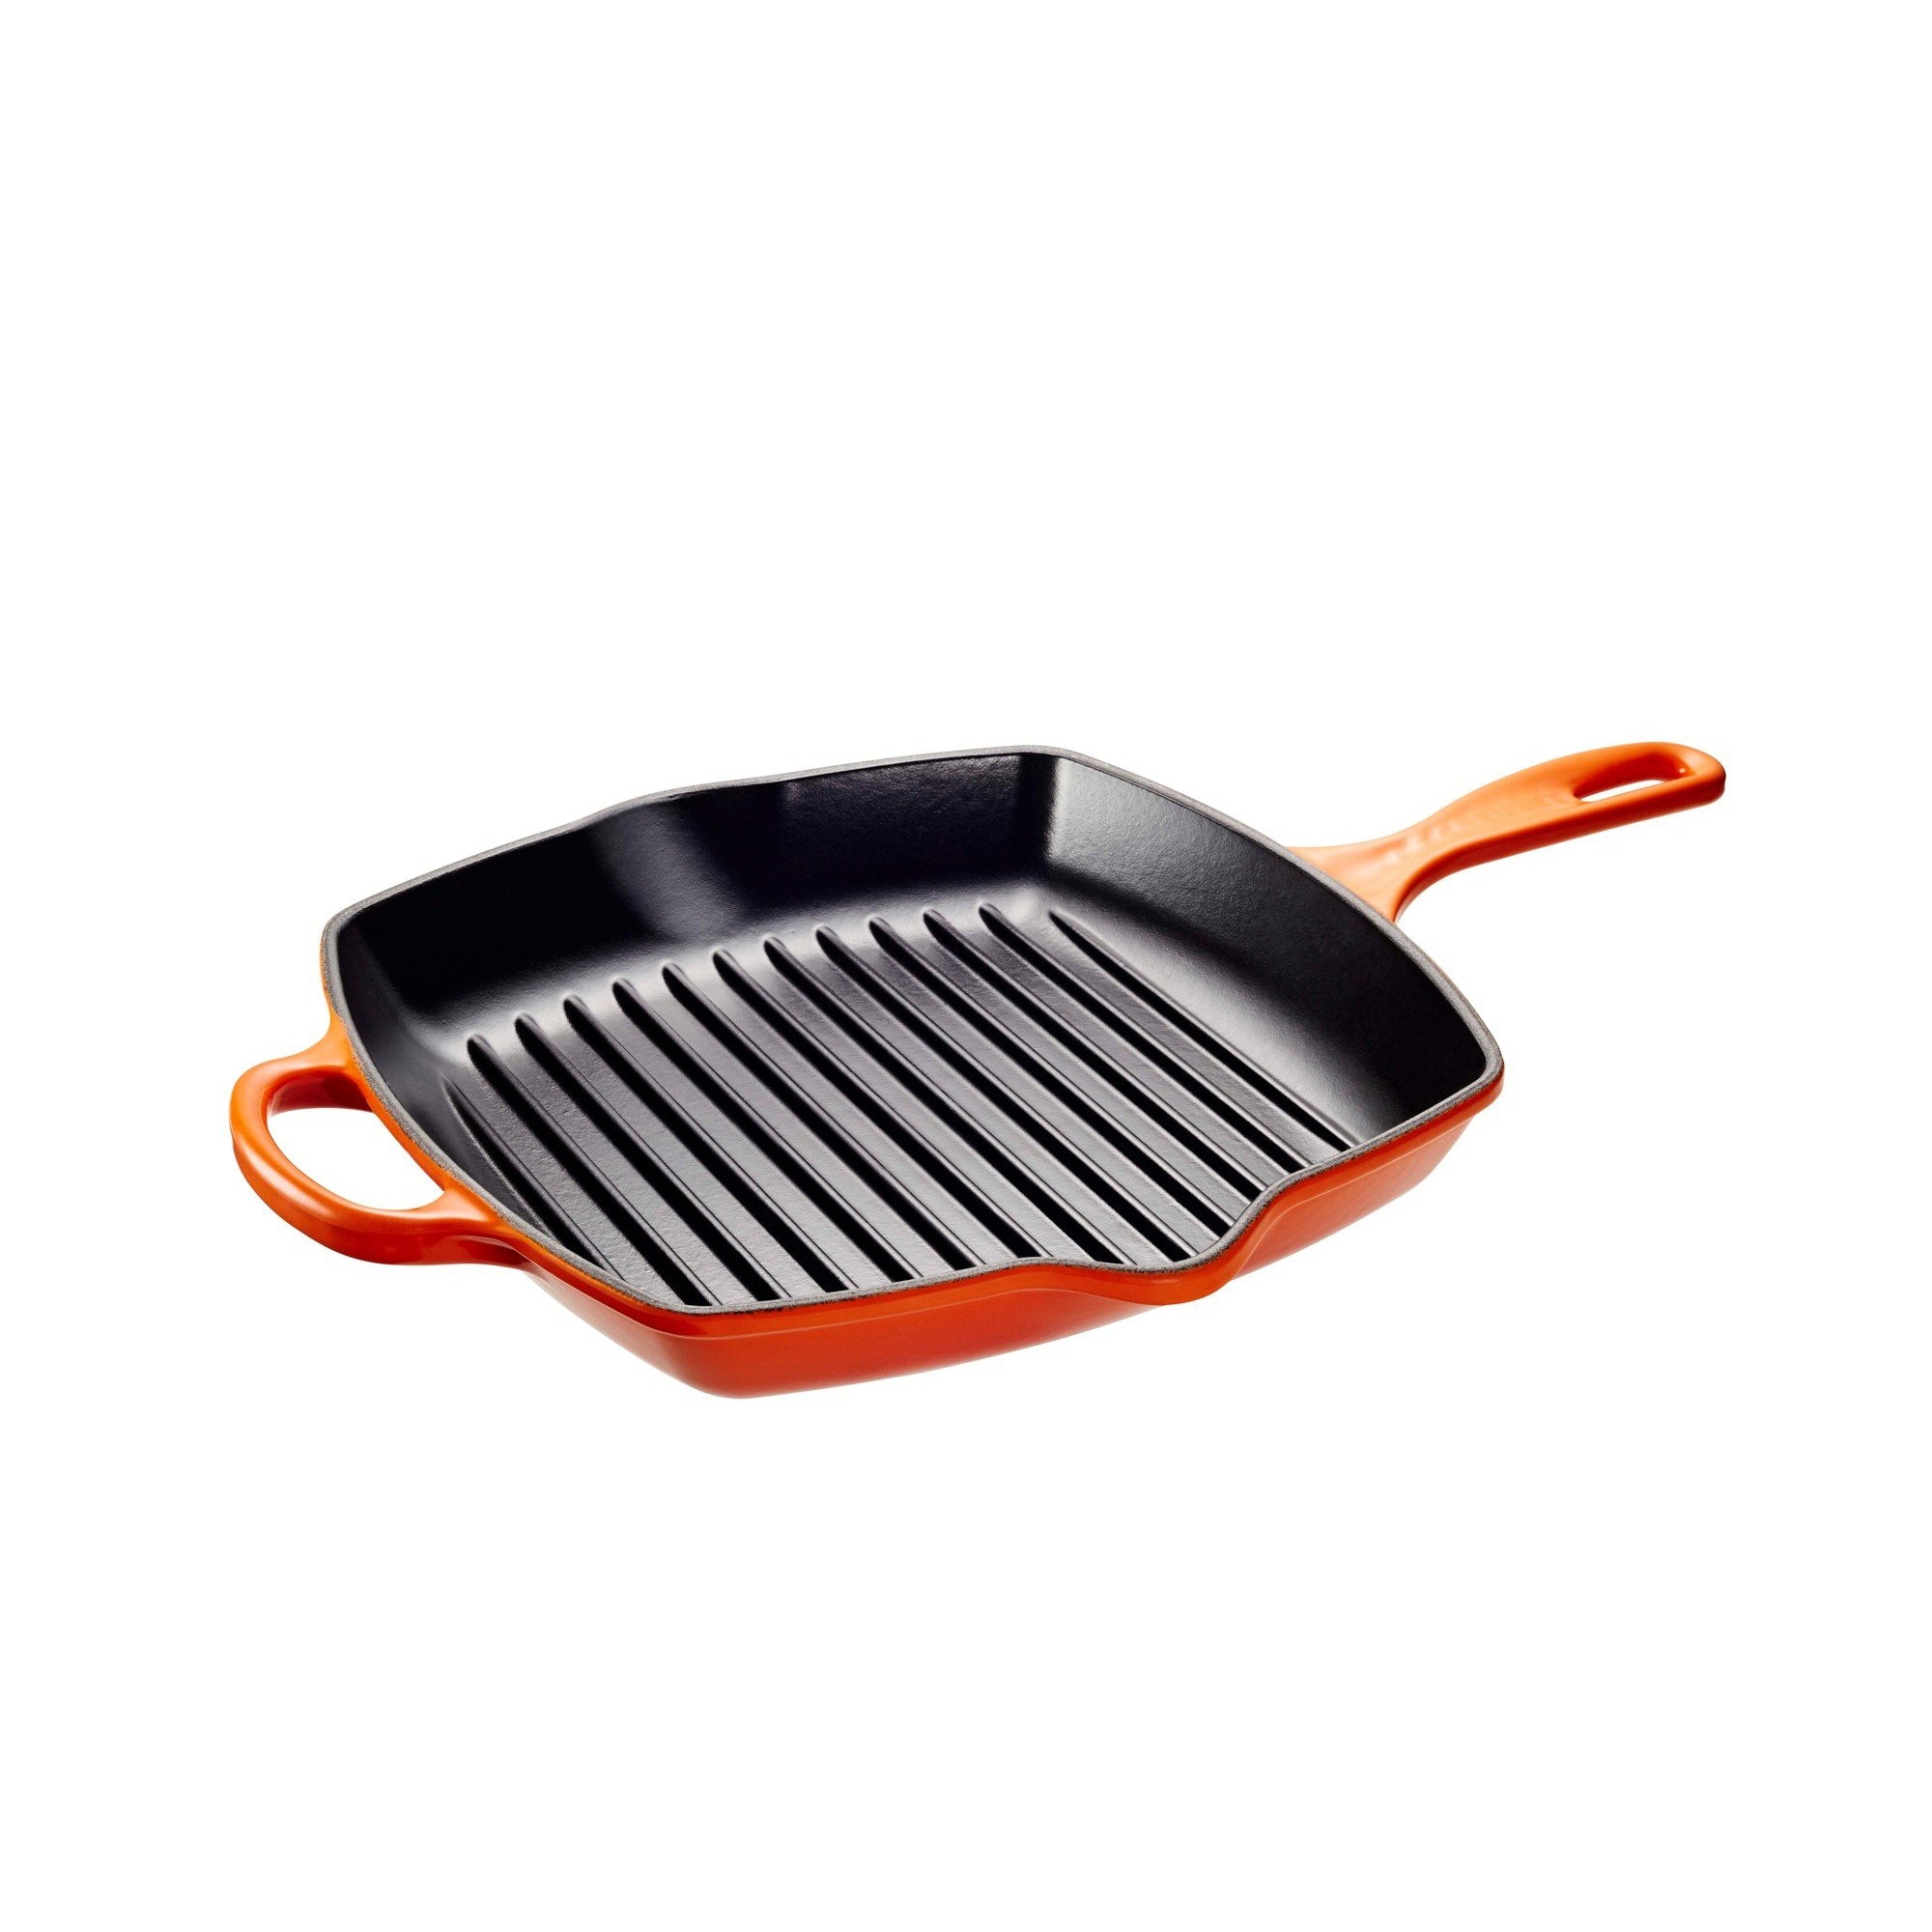 Le Creuset Flame Grill Pan Brush